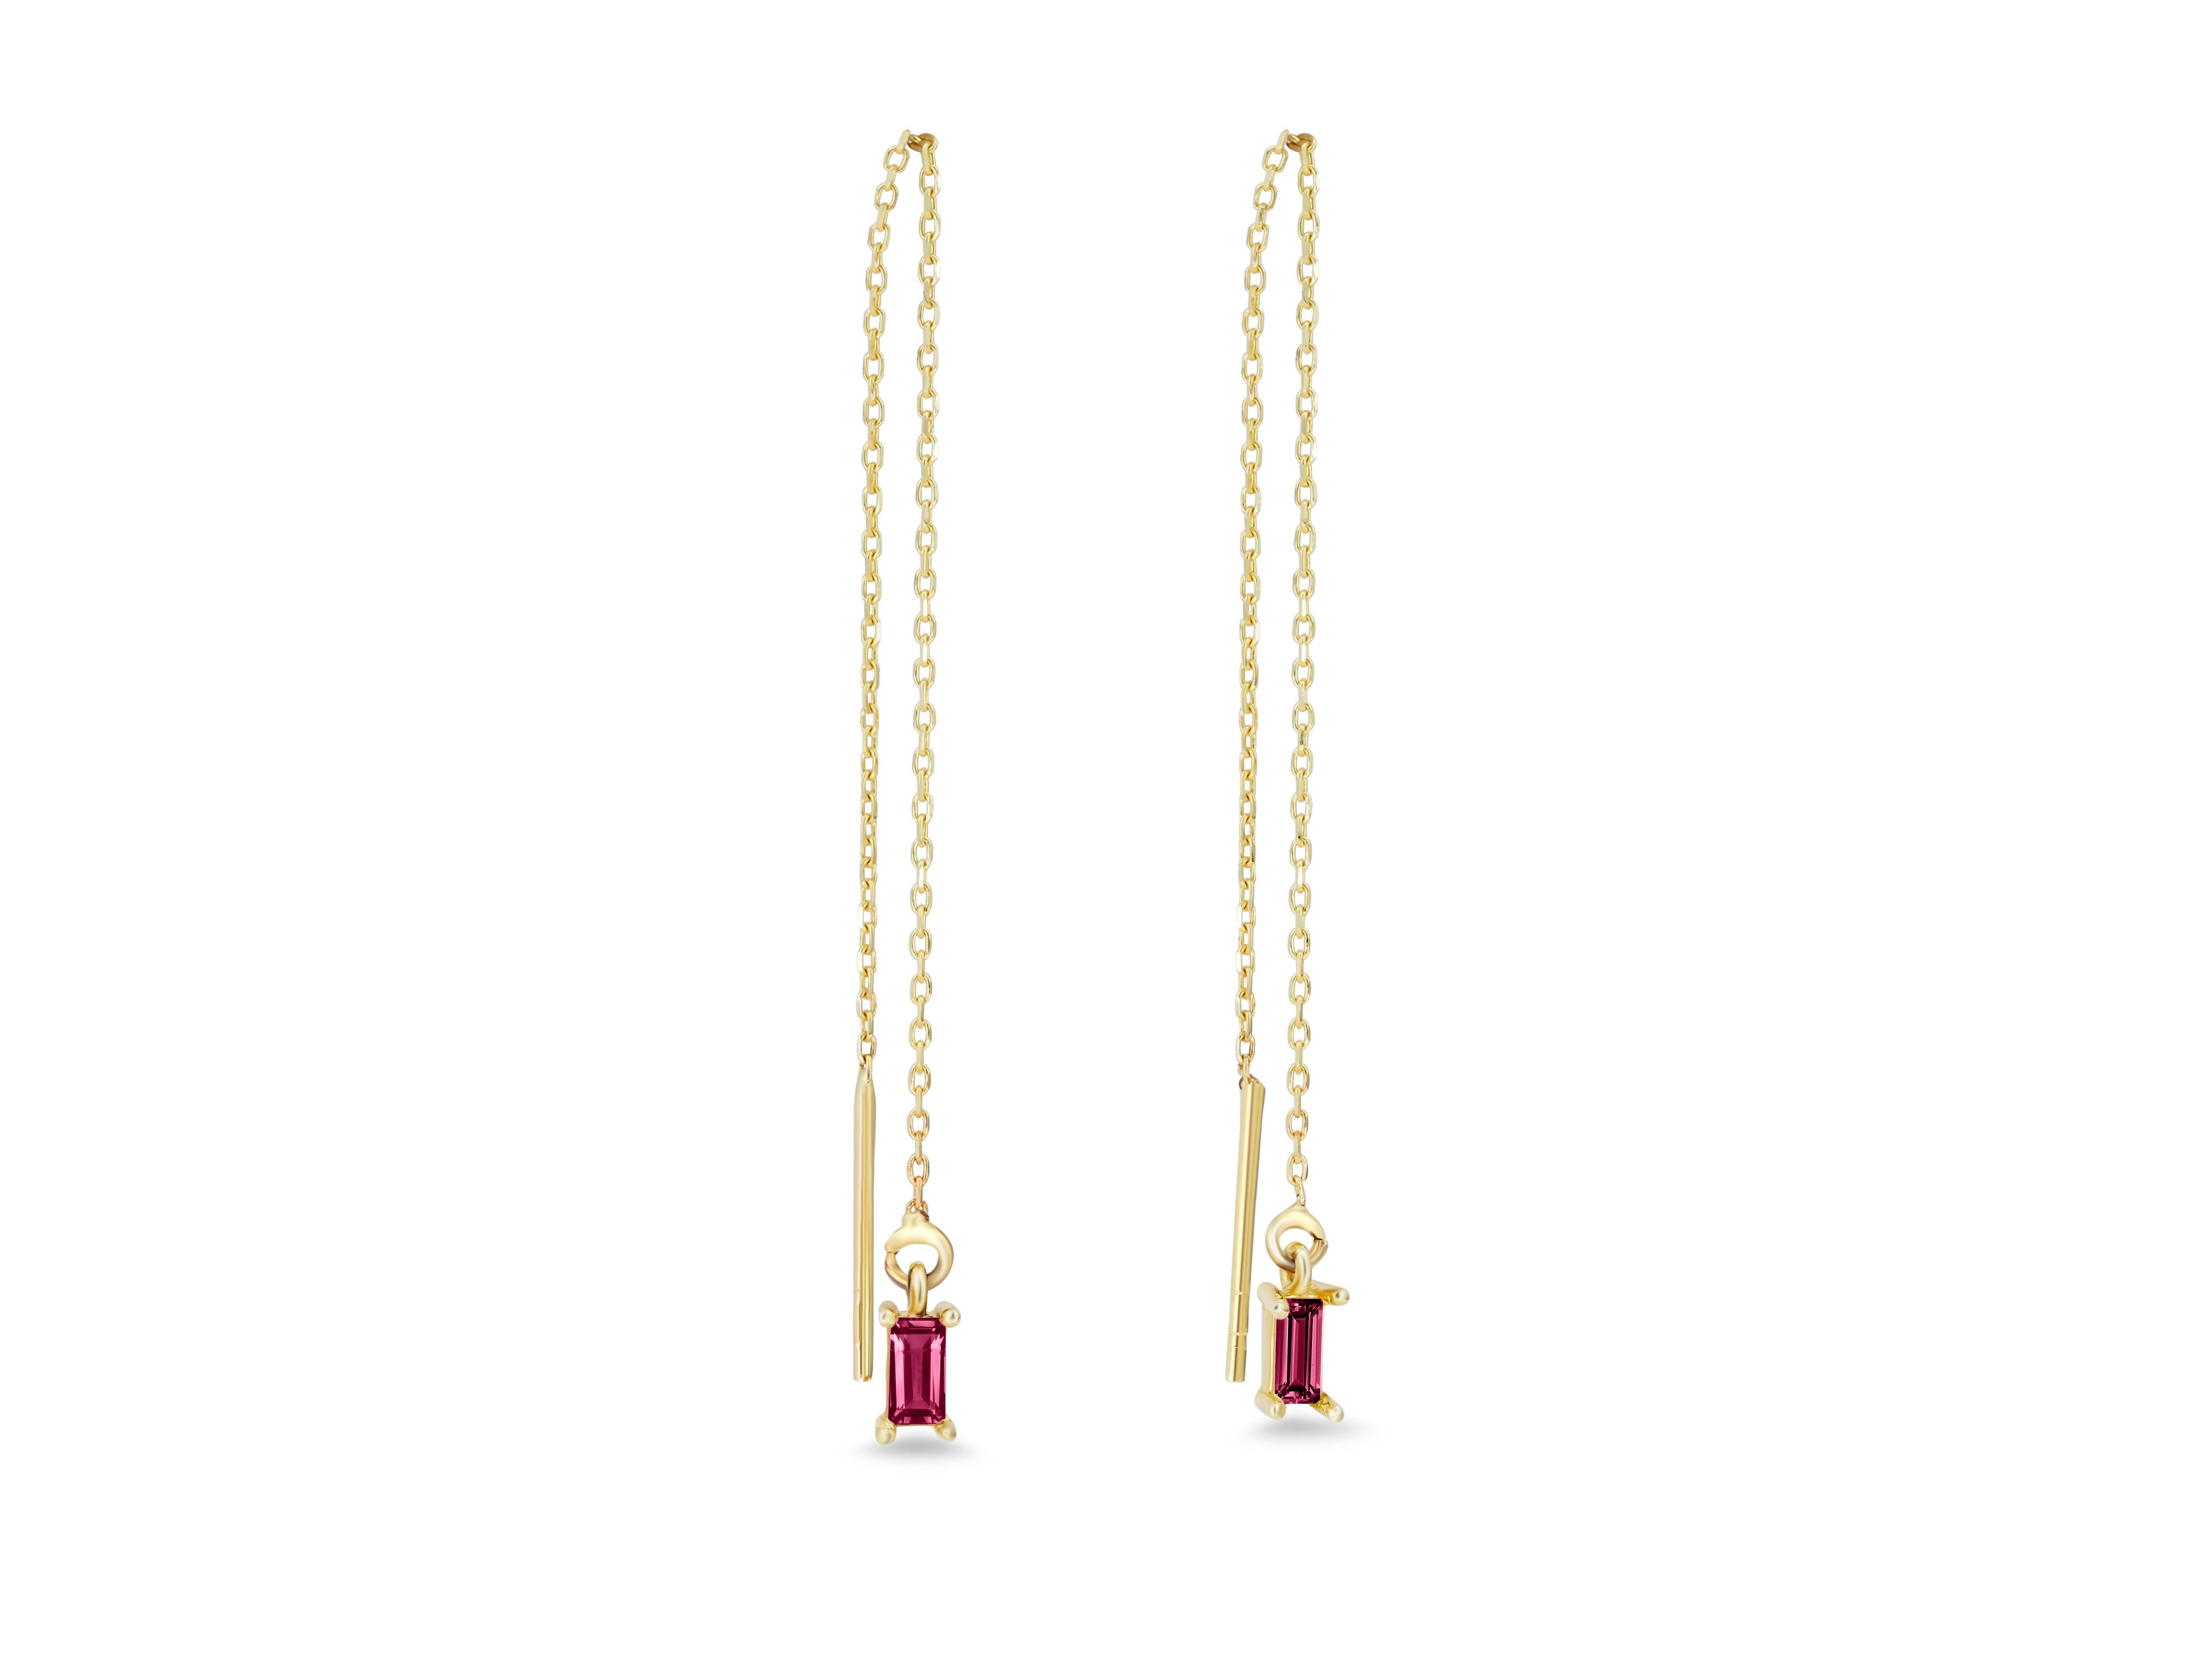 14k Solid Gold Drop Earrings with rubies. 
Chain Gold Earrings. Rubies Drop Gold Threaders. Ruby gold earrings. Baguette earrings.

Metal: 14 karat yellow gold
Weight: 0.8-0.9 g.
Size: 6.5-6.8 sm
Central stones: Natural rubies 2 pieces
Cut: